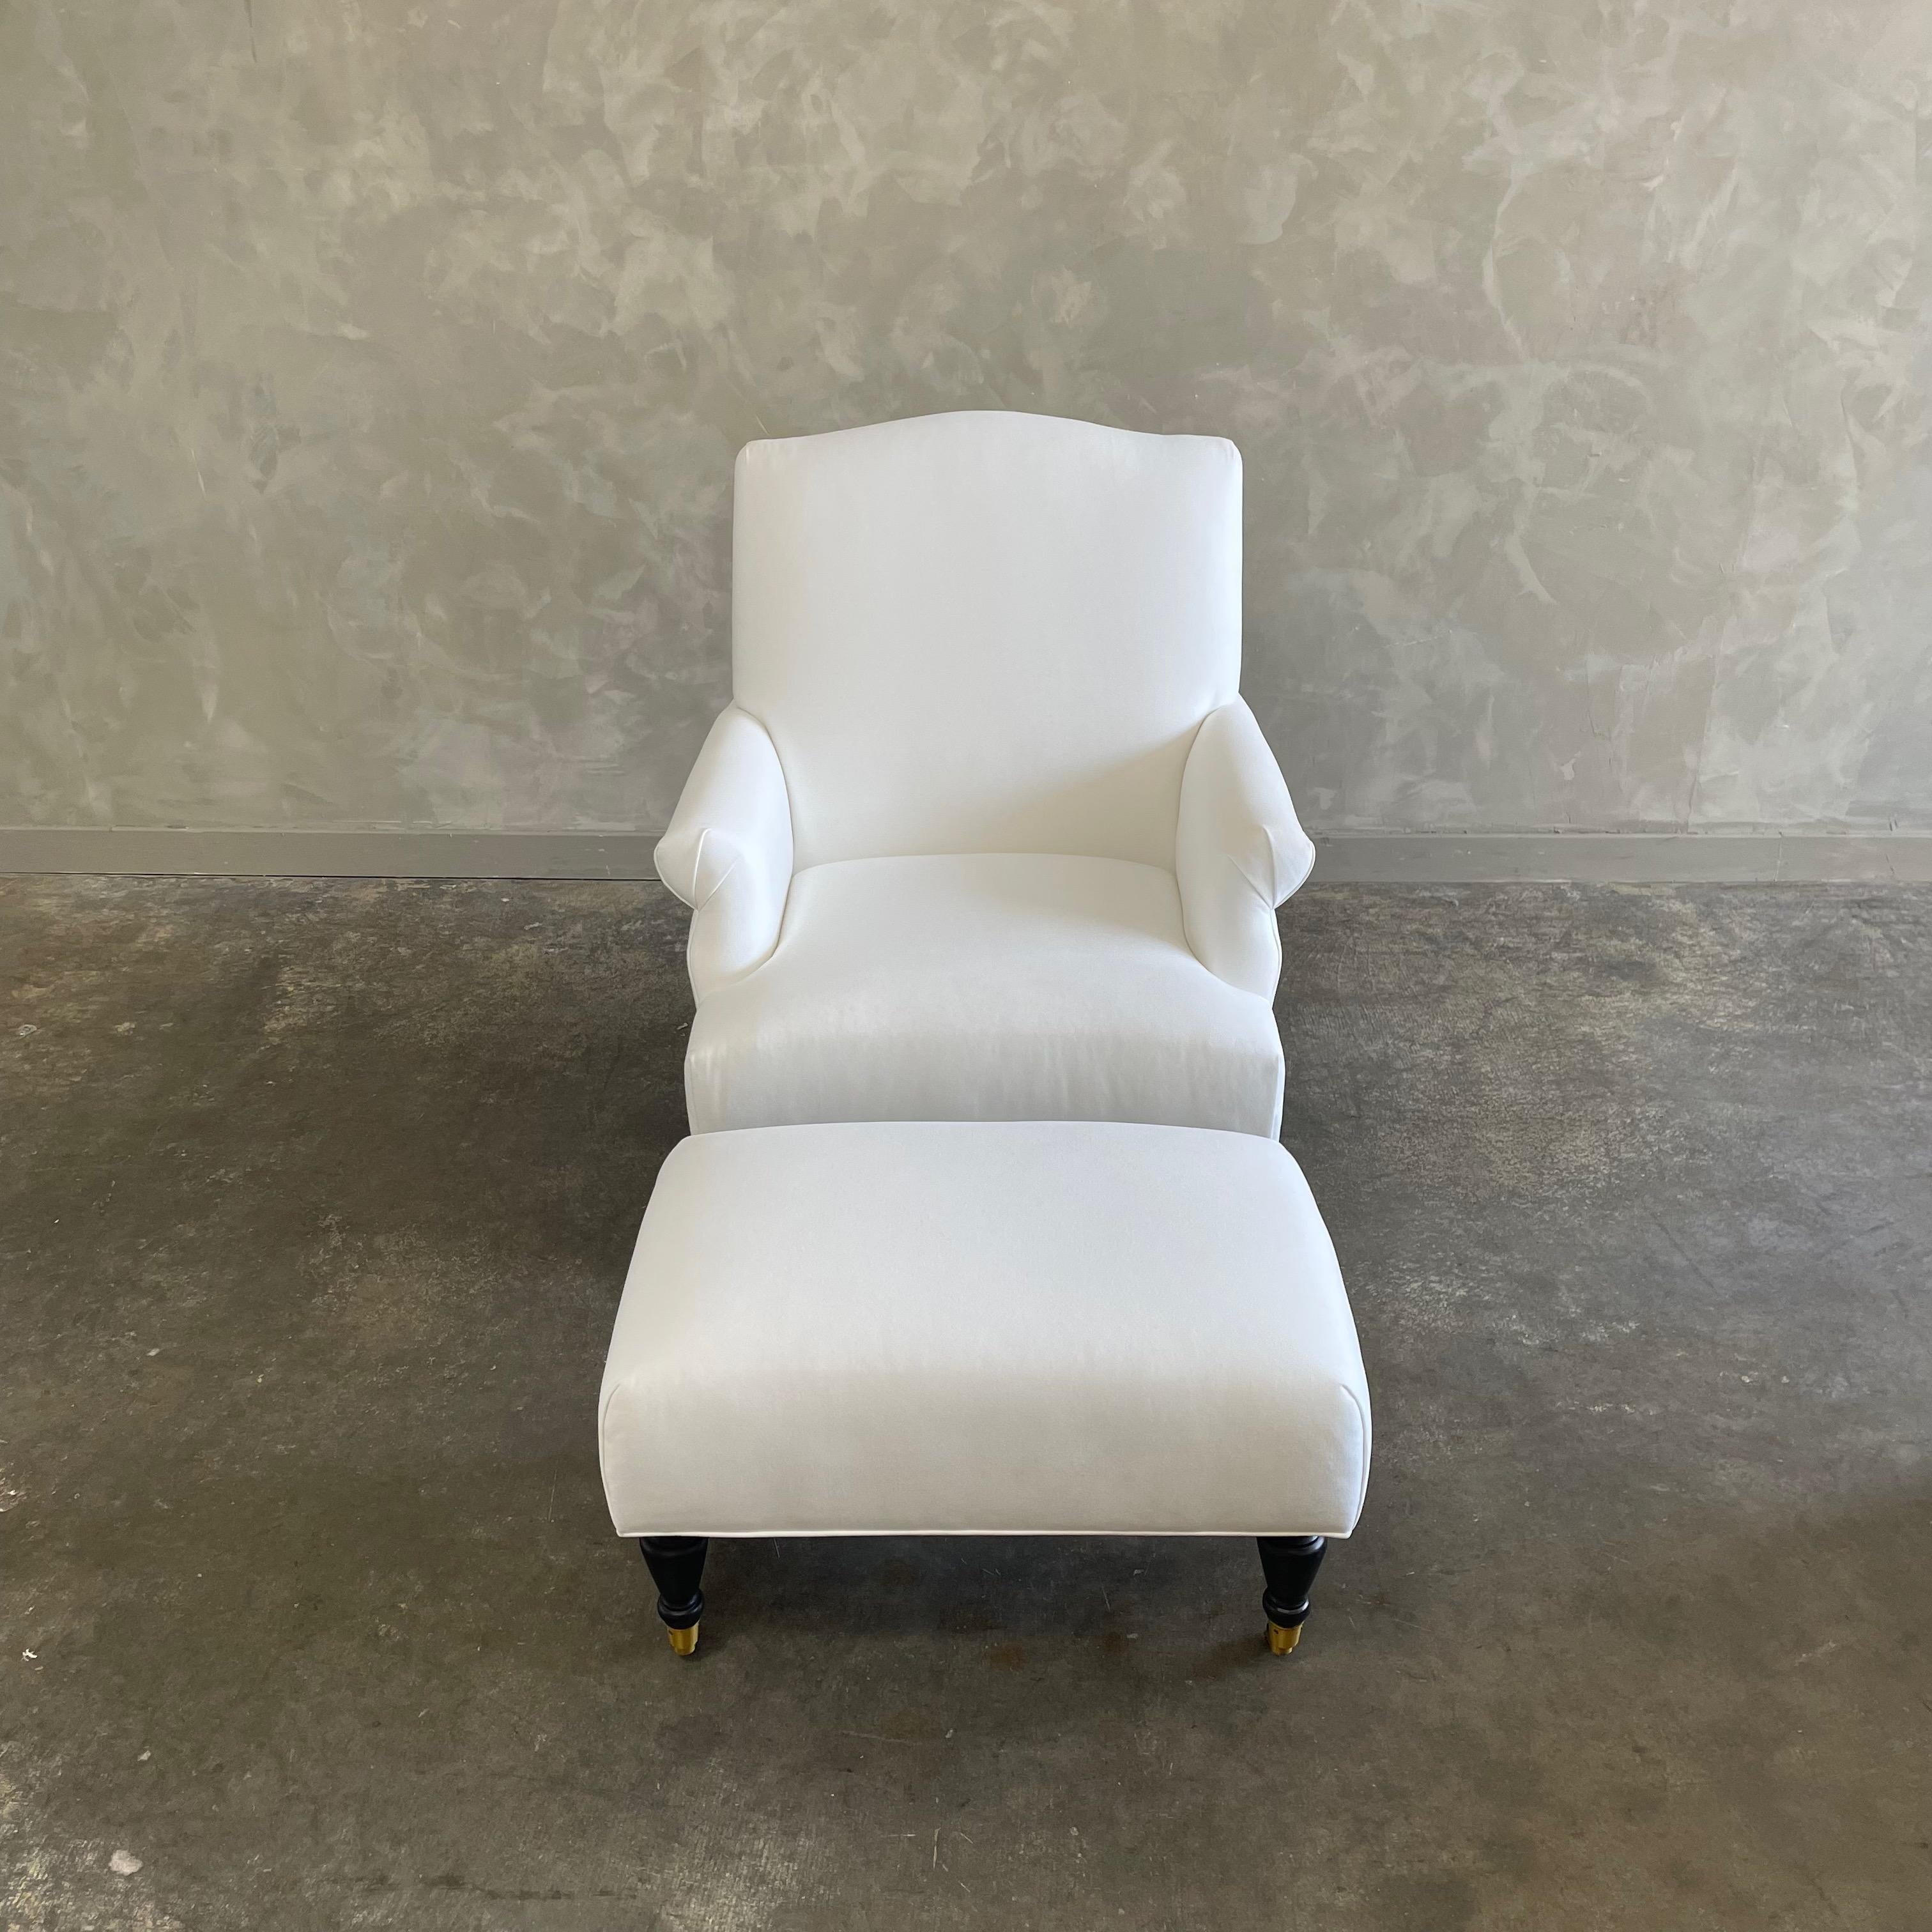 Modern Upholstered Linen Chair & Ottoman In Excellent Condition For Sale In Brea, CA